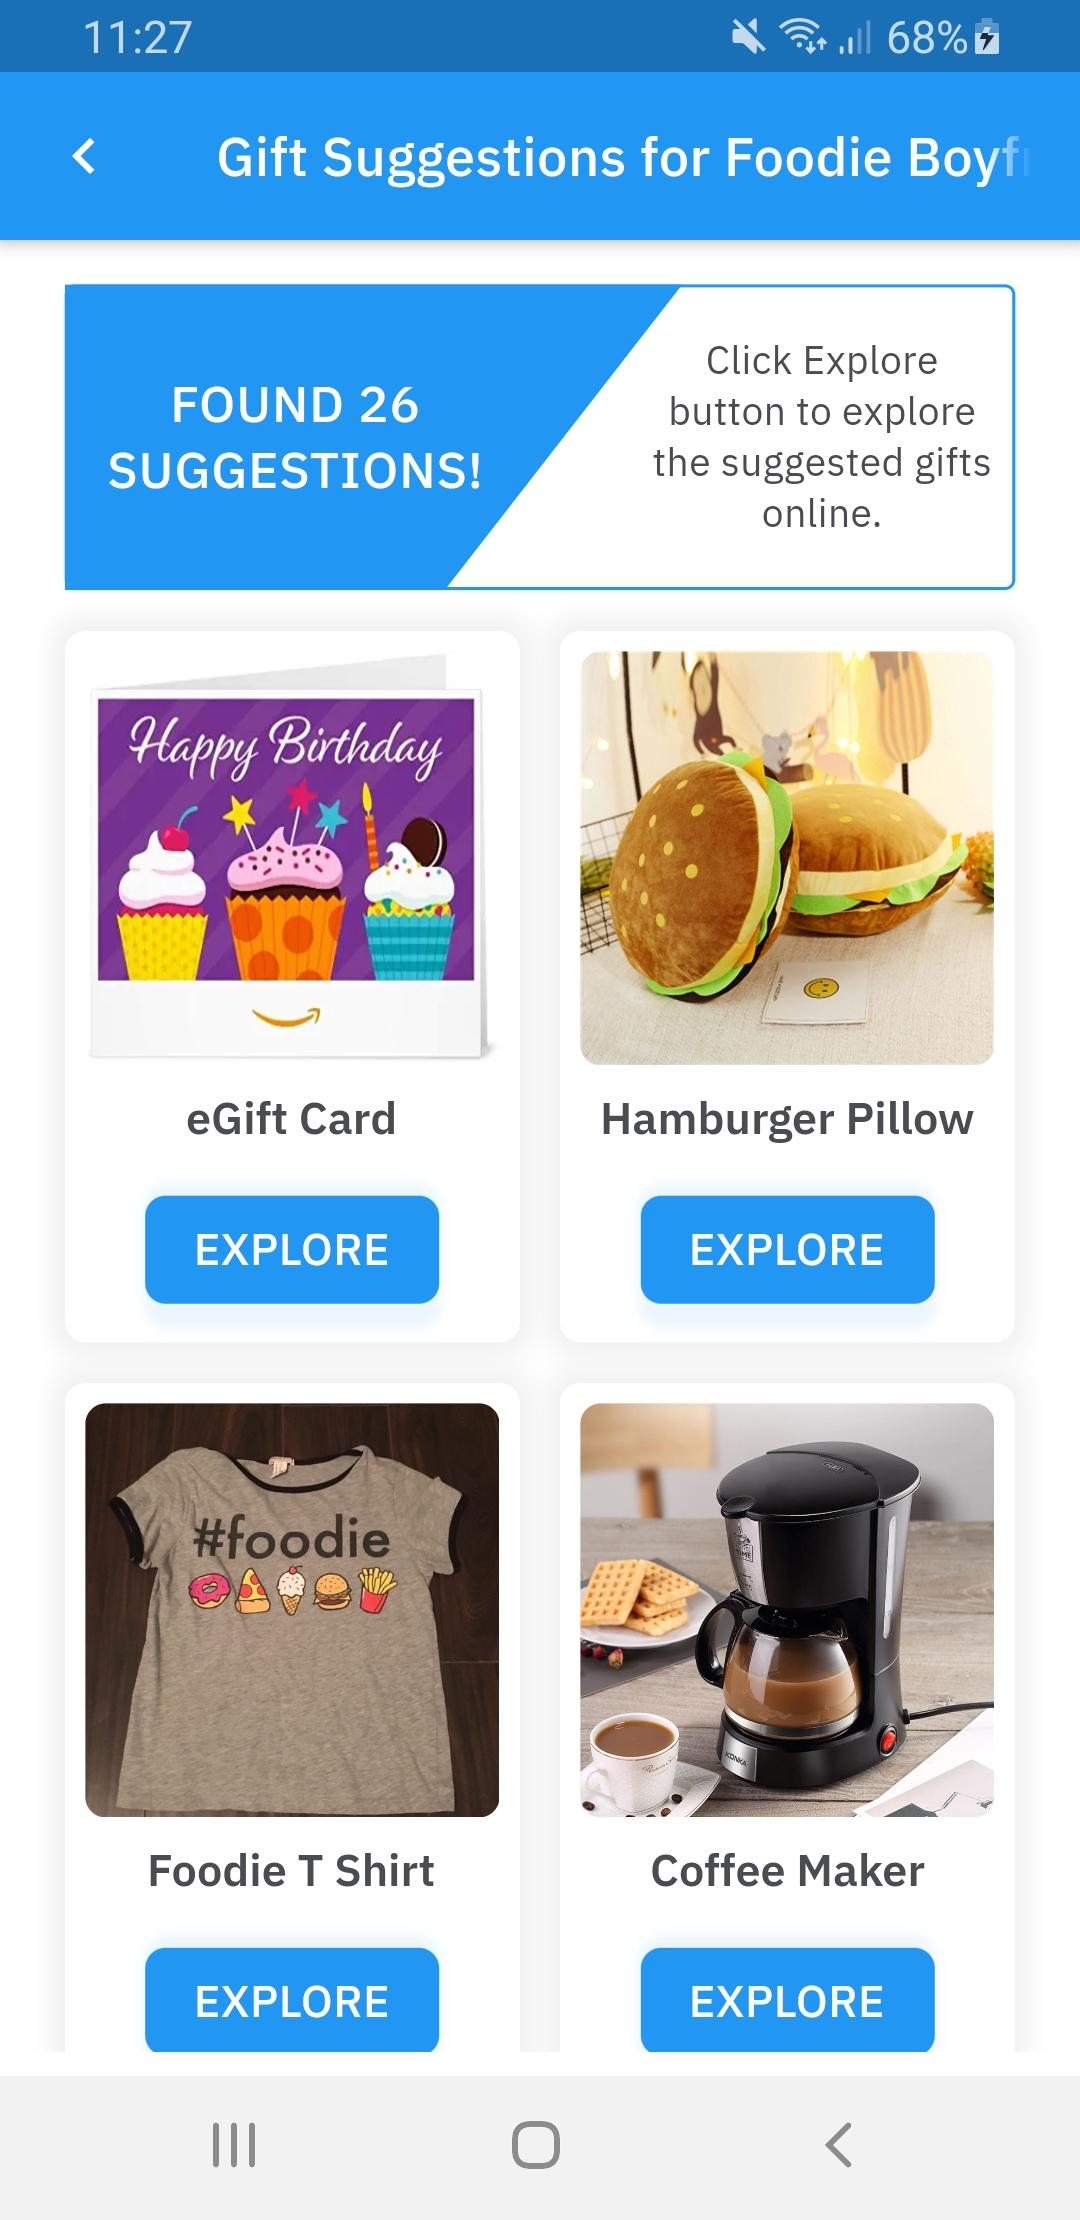 GIFTLY - Gift Ideas & Suggestions 1.0.2 Screenshot 2